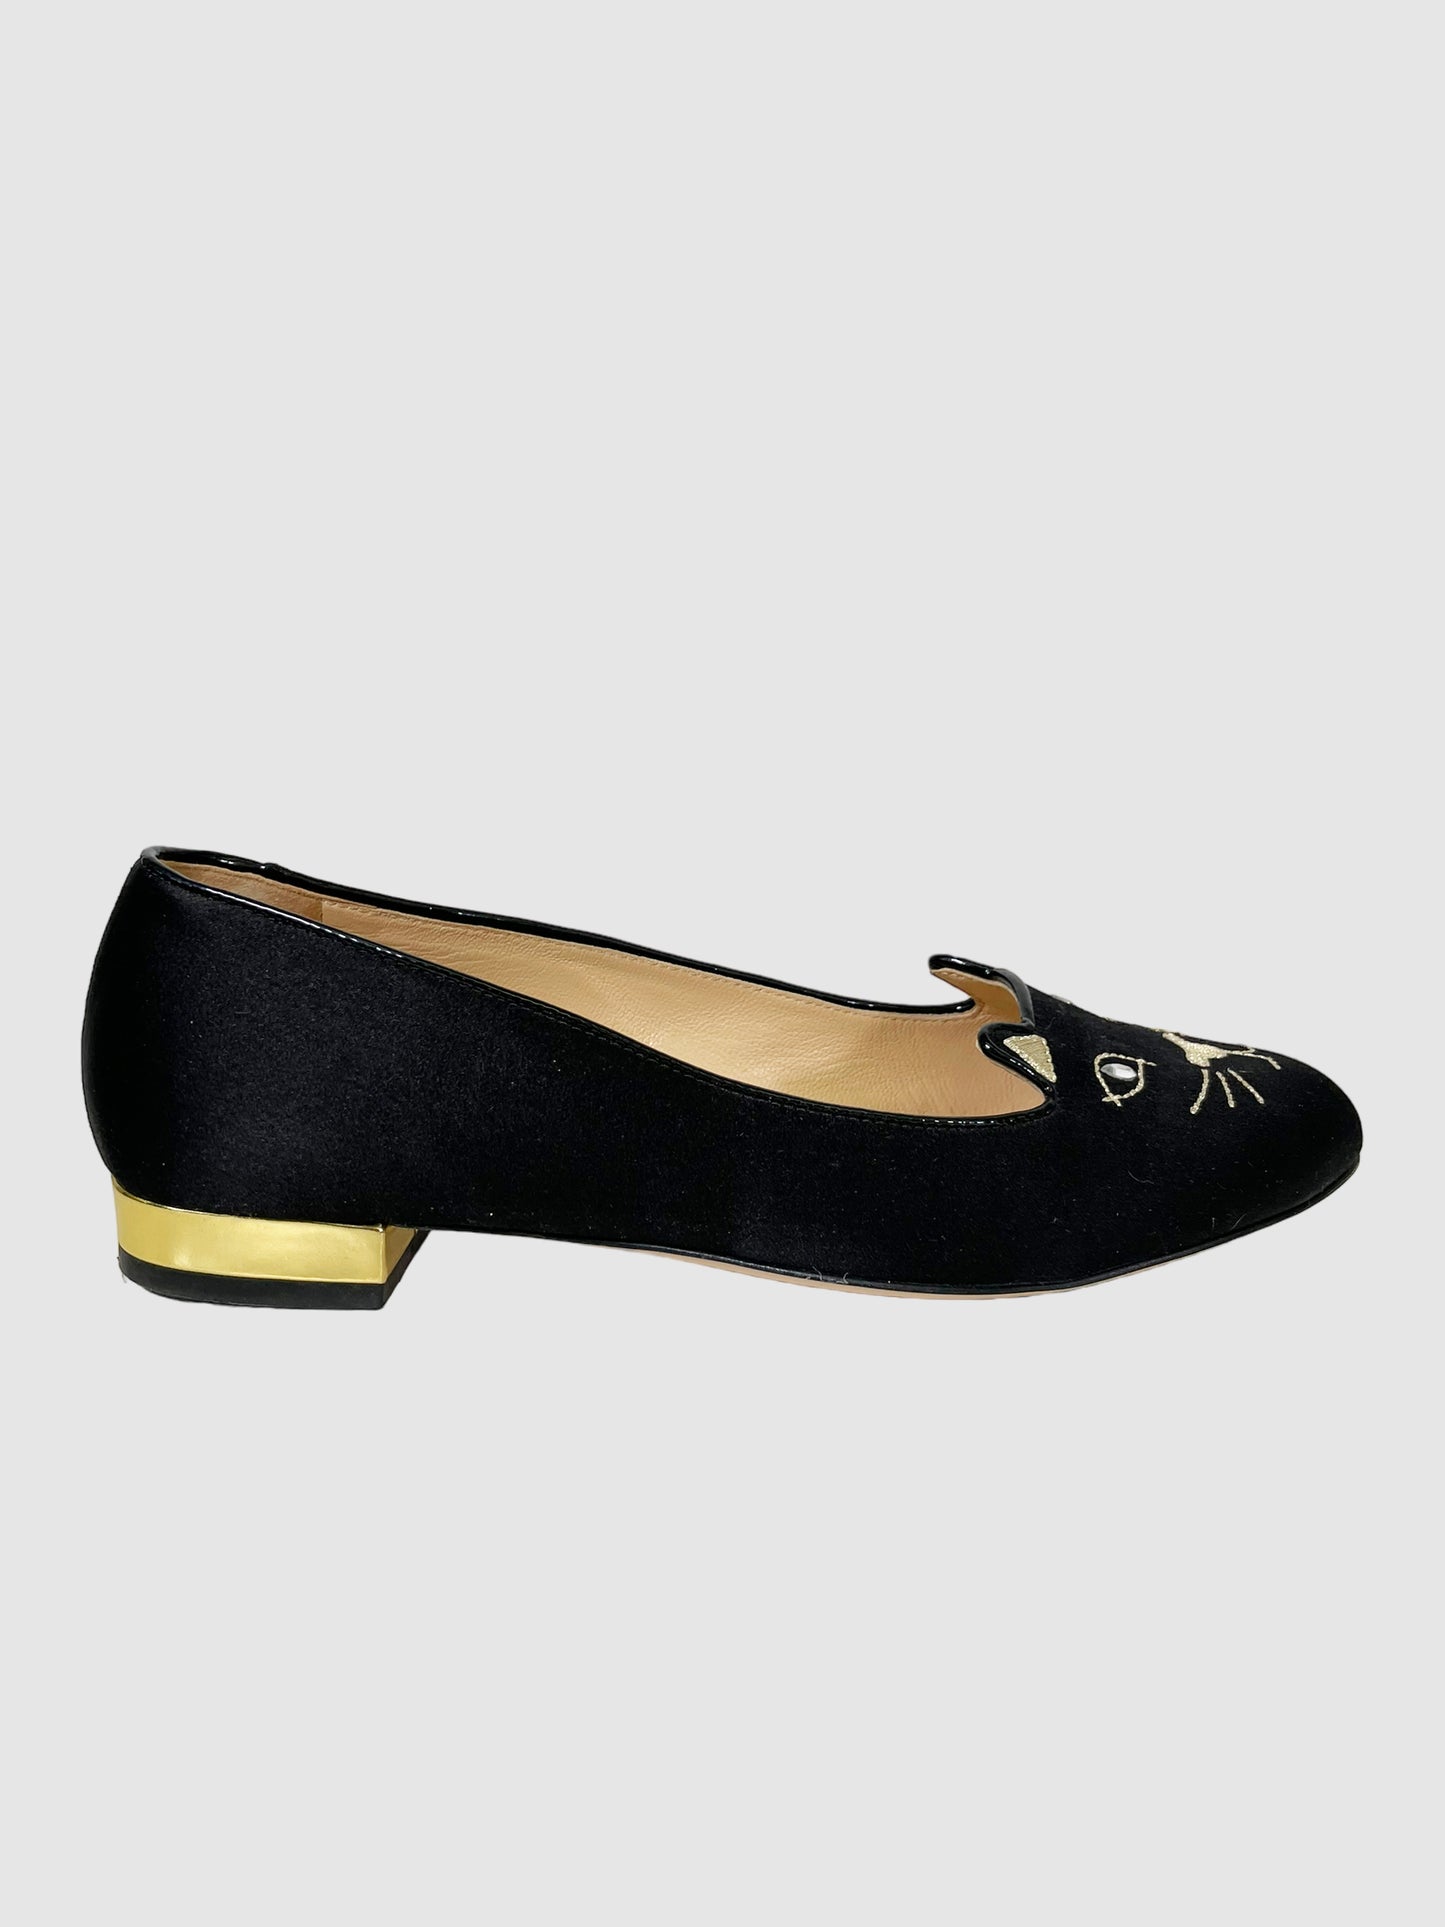 Charlotte Olympia Satin Loafers - Size 38